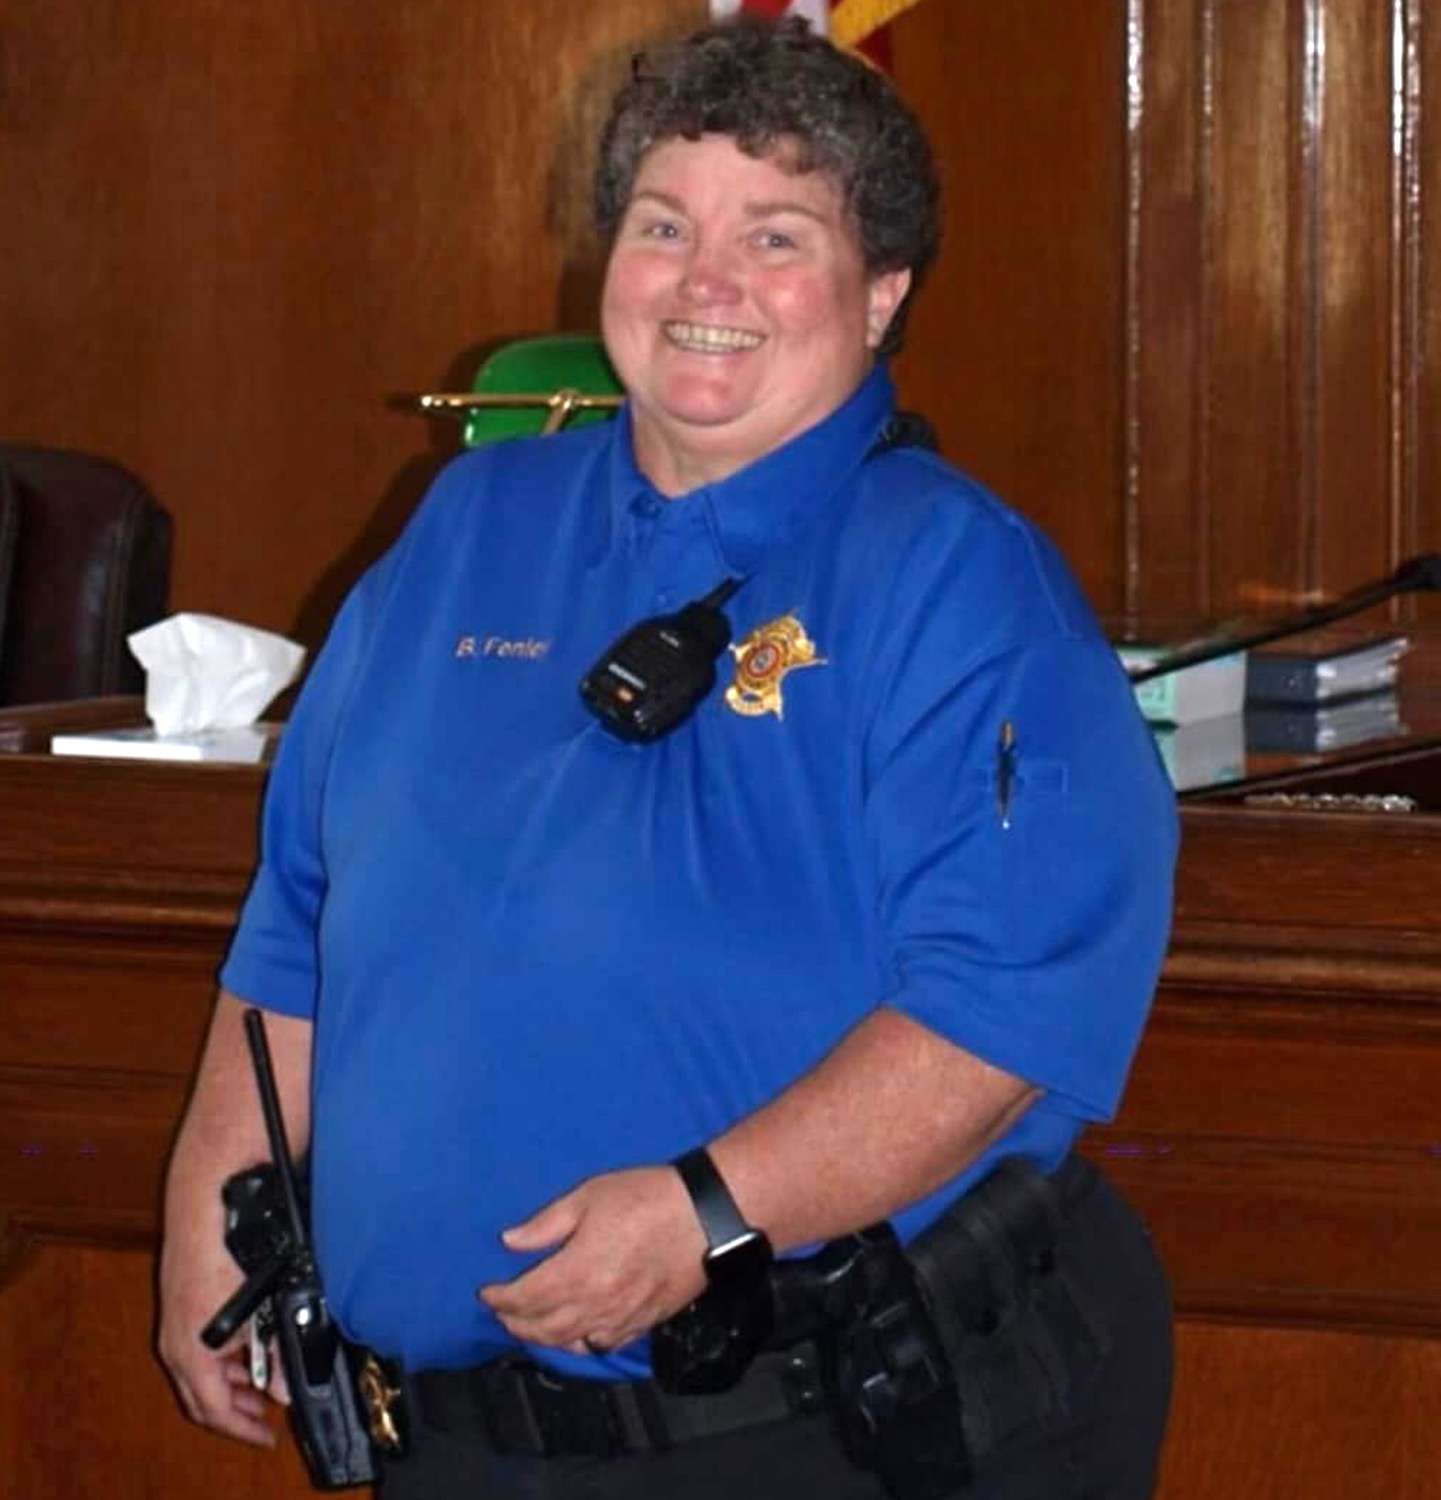 Officer Dies in Texas Fire After Poor Viewing Conditions Cause Her to Run Off Roadway Into Flames Barbara-majors-fenley